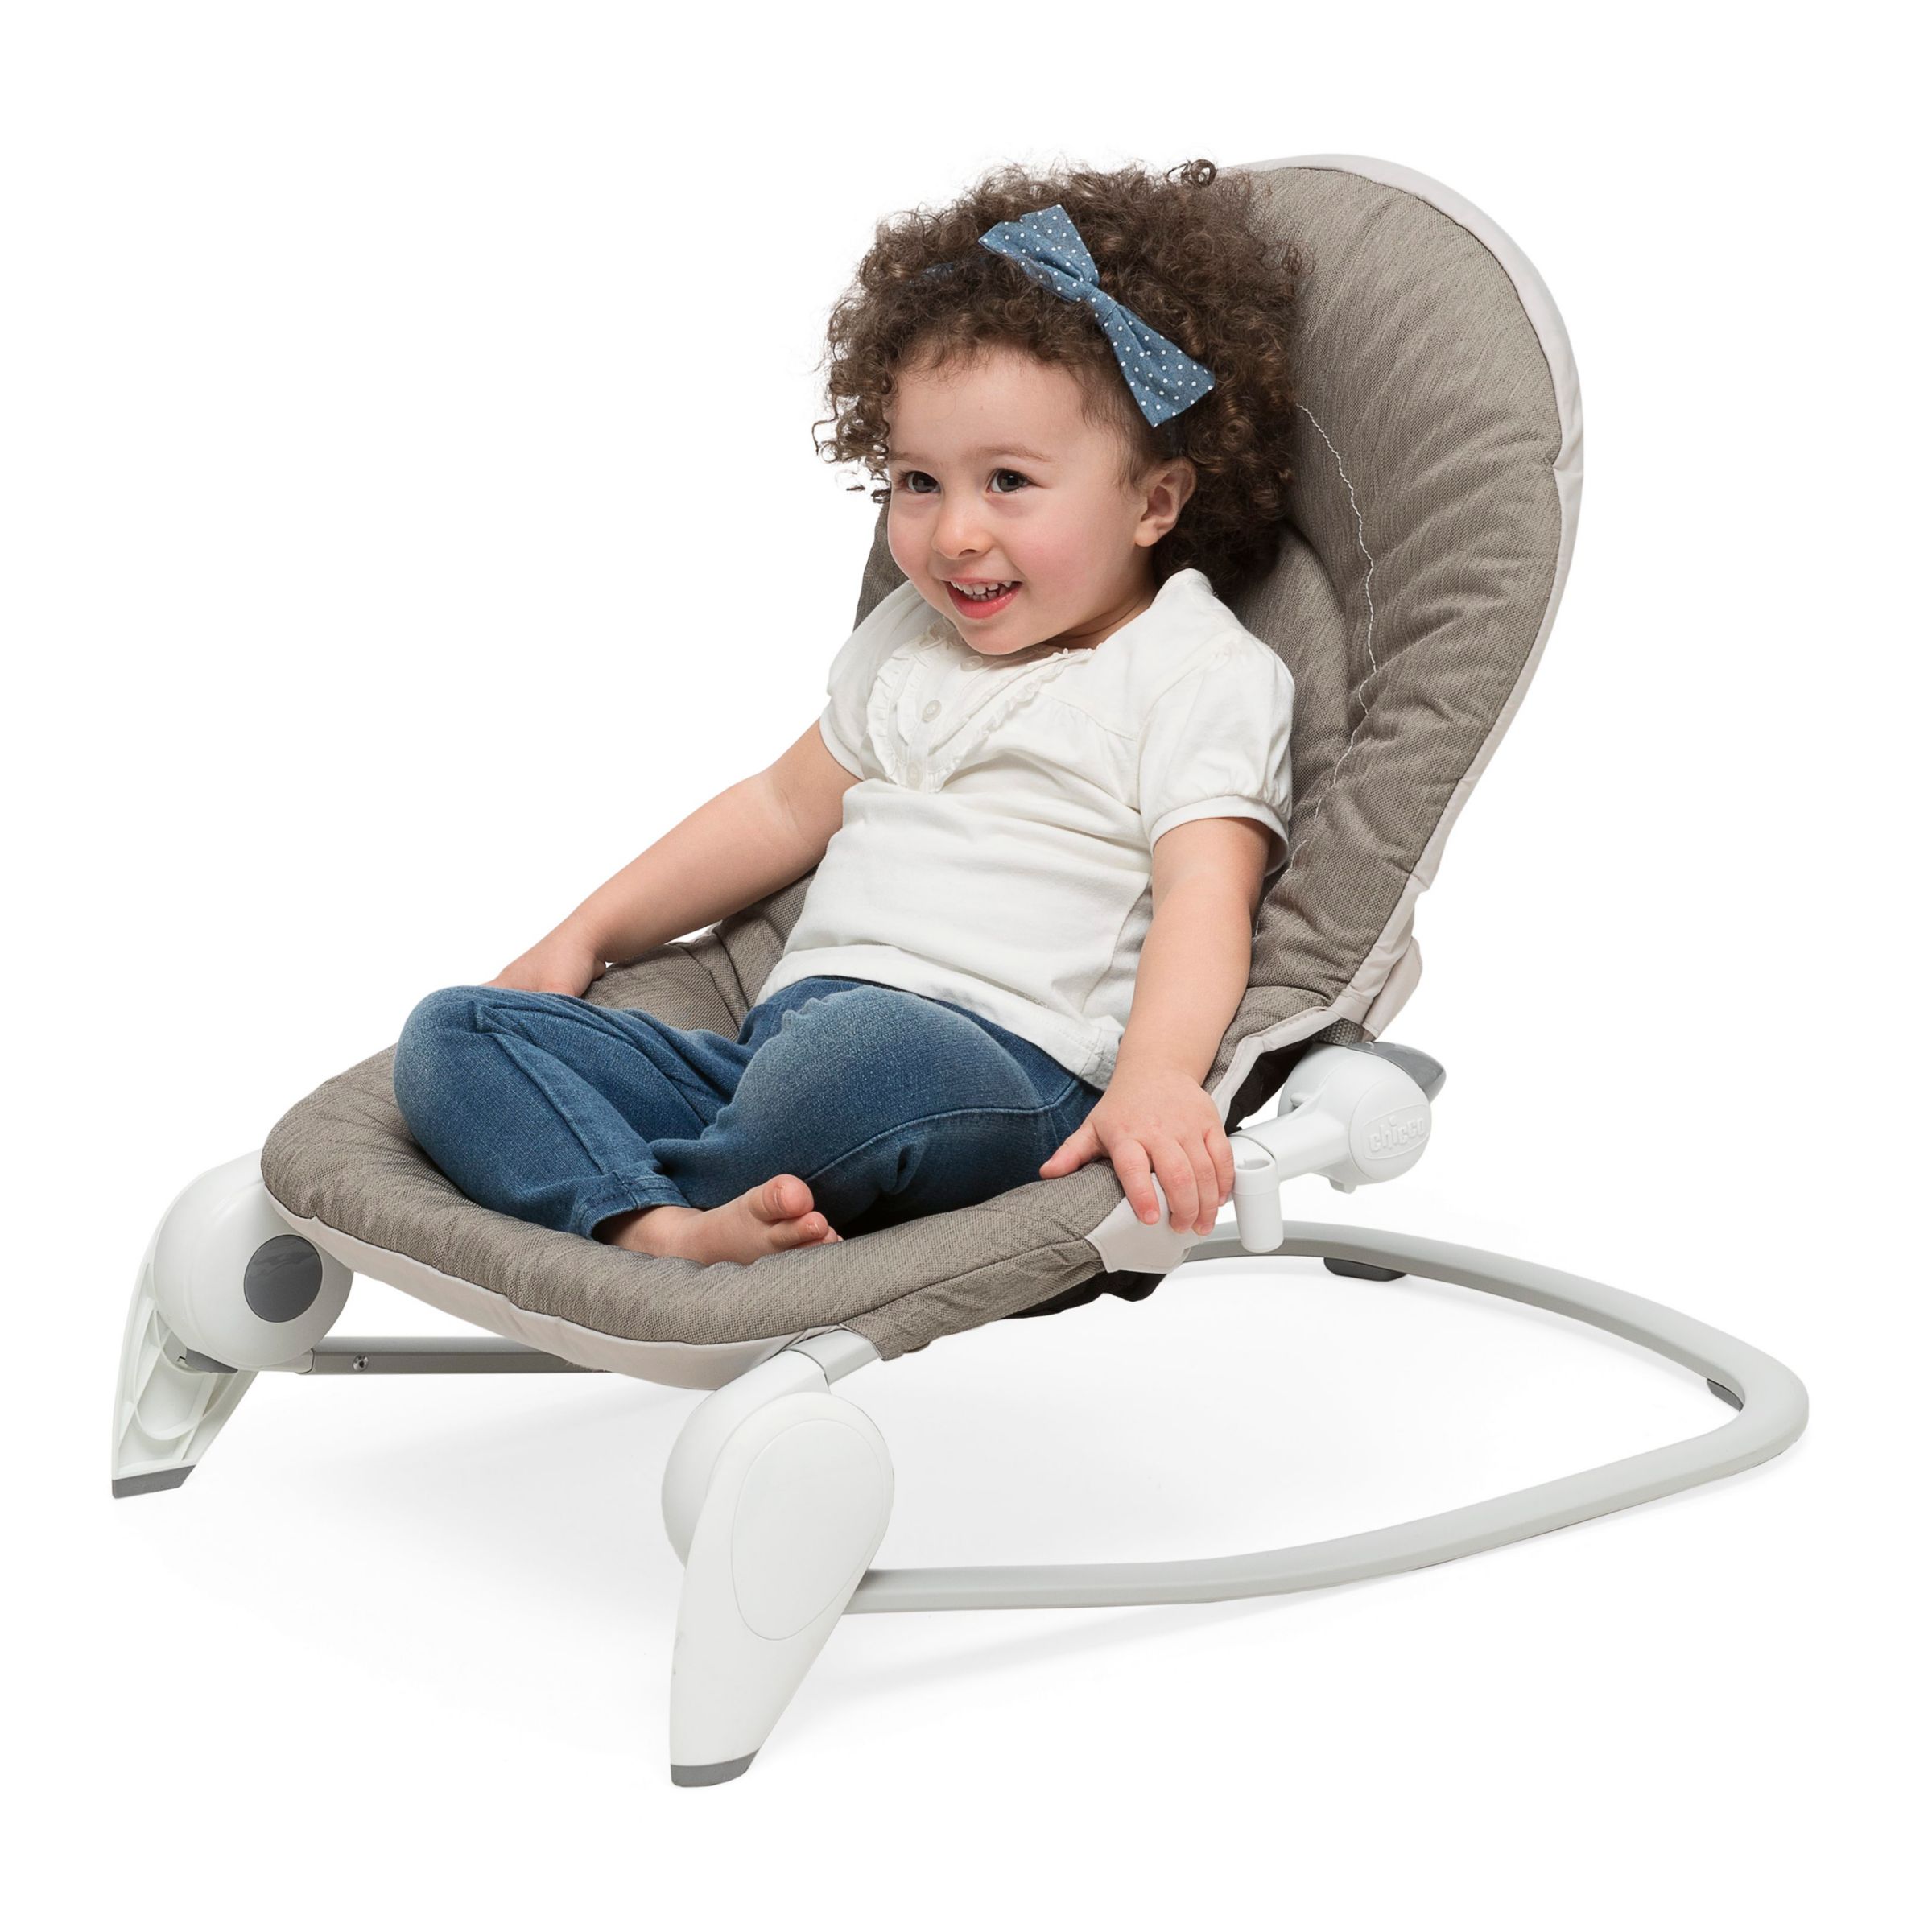 bouncy seat for toddlers